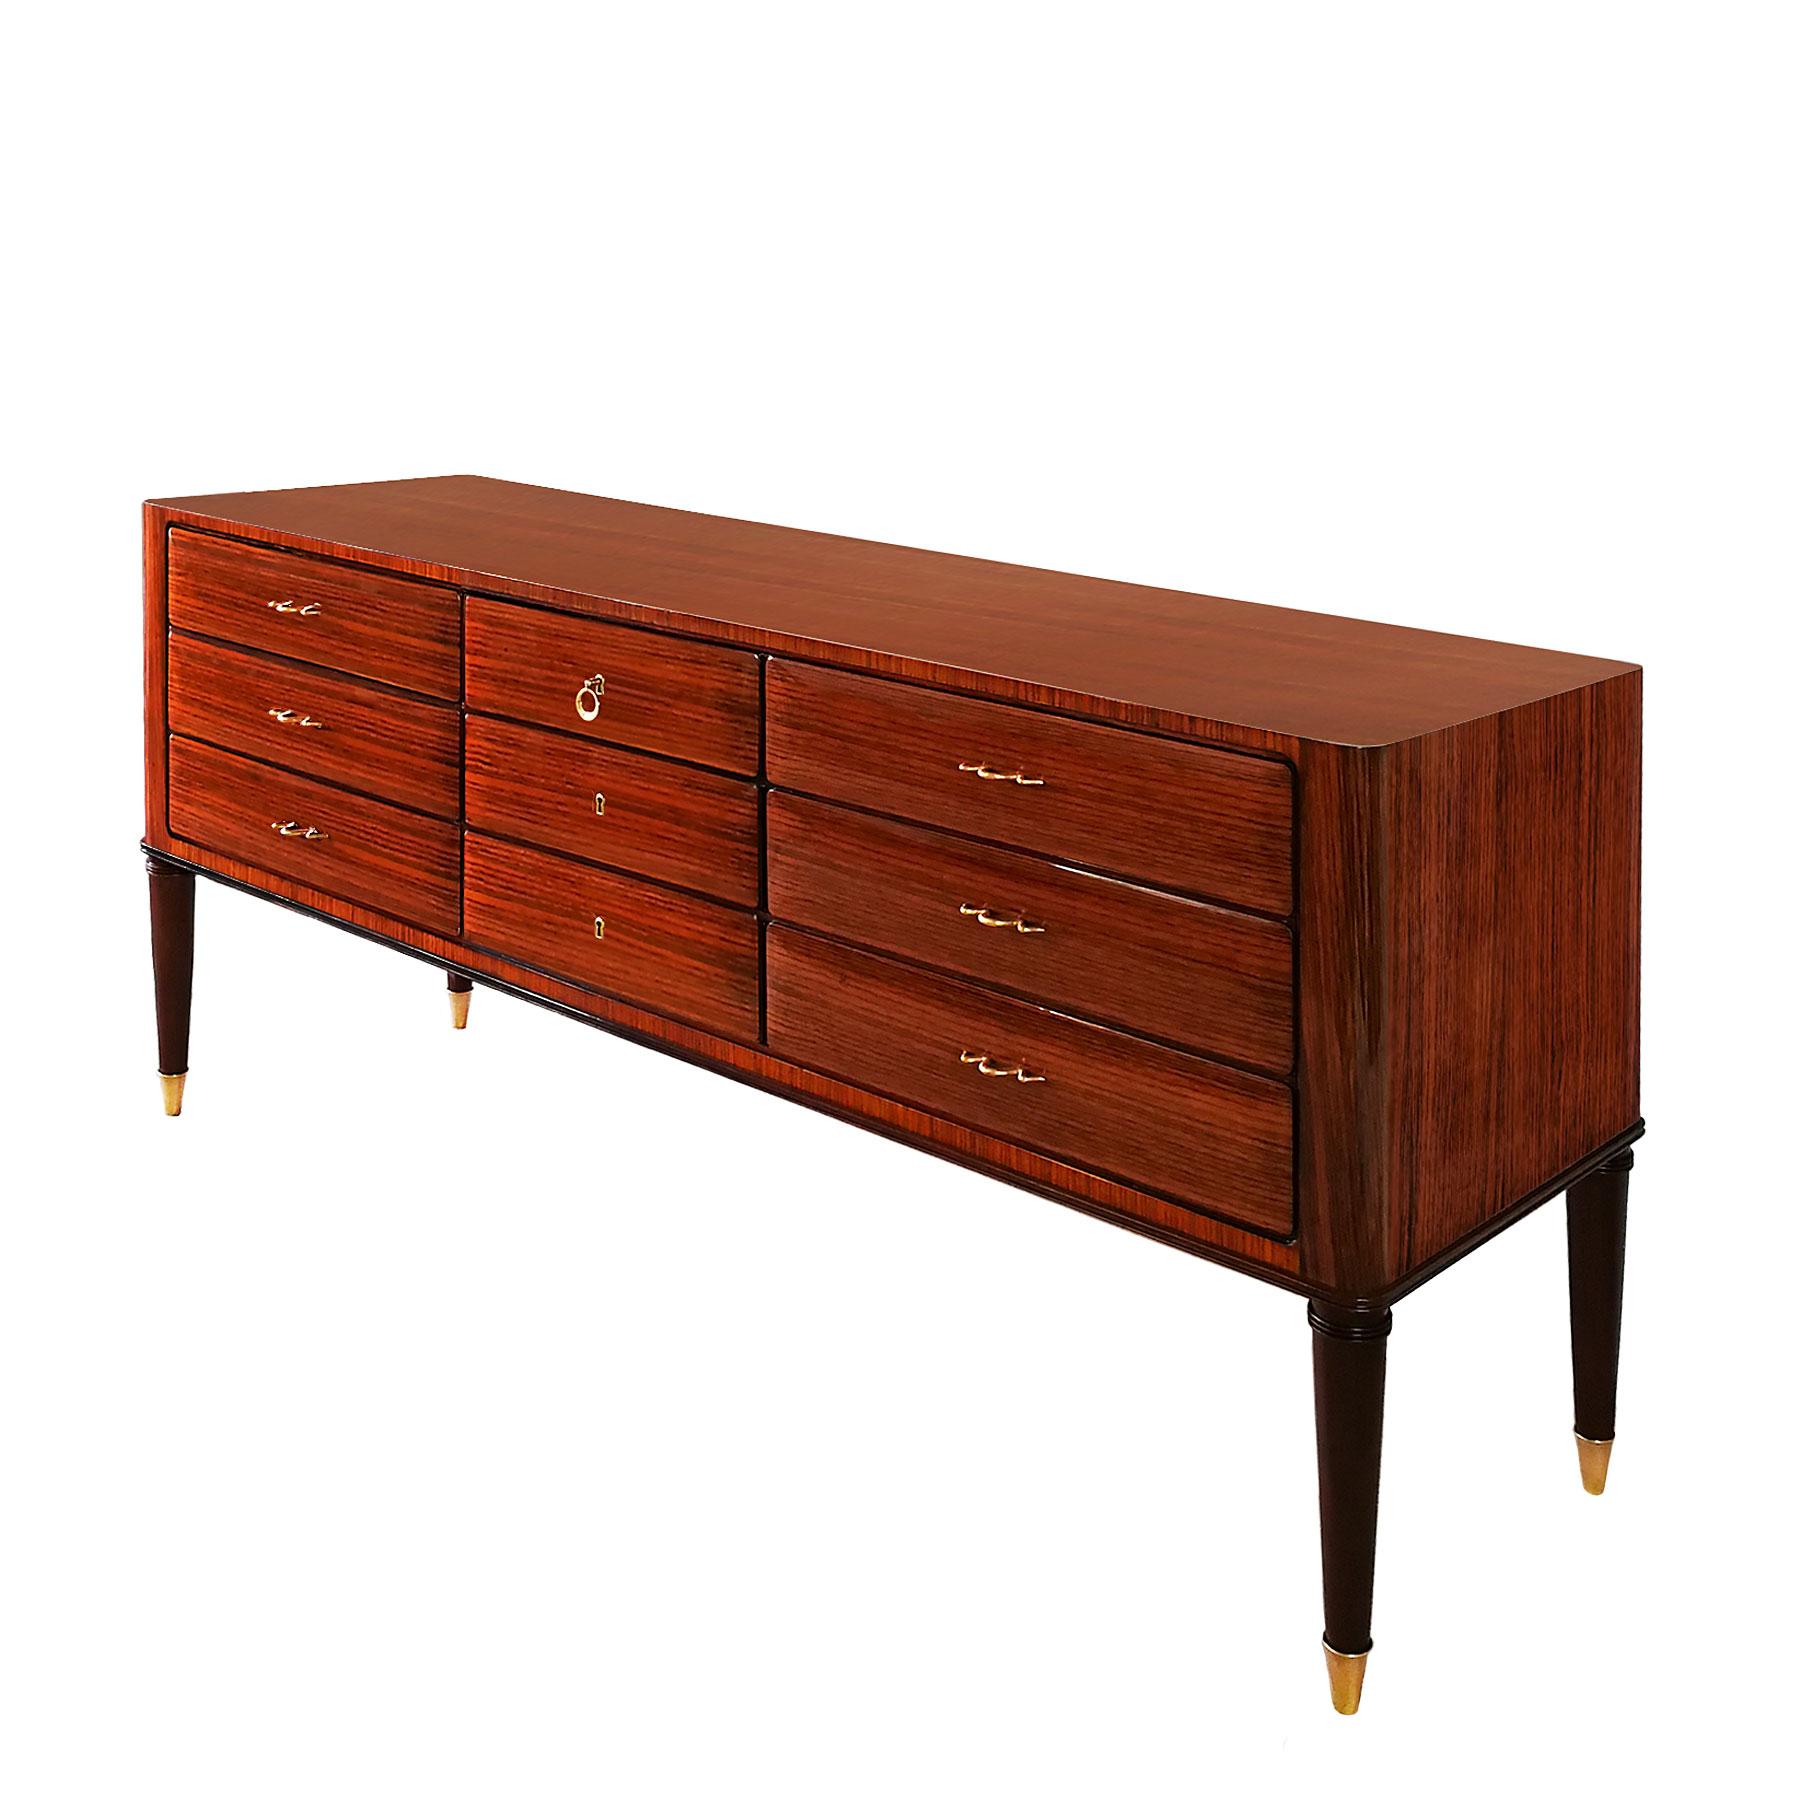 Large commode with six drawers, solid wood with zebra wood veneer, French polish. Solid mahogany feet, polished brass handles and hardware.

Italy, circa 1945 

Measures: Depth 49.5 cm - 52 cm with handles.